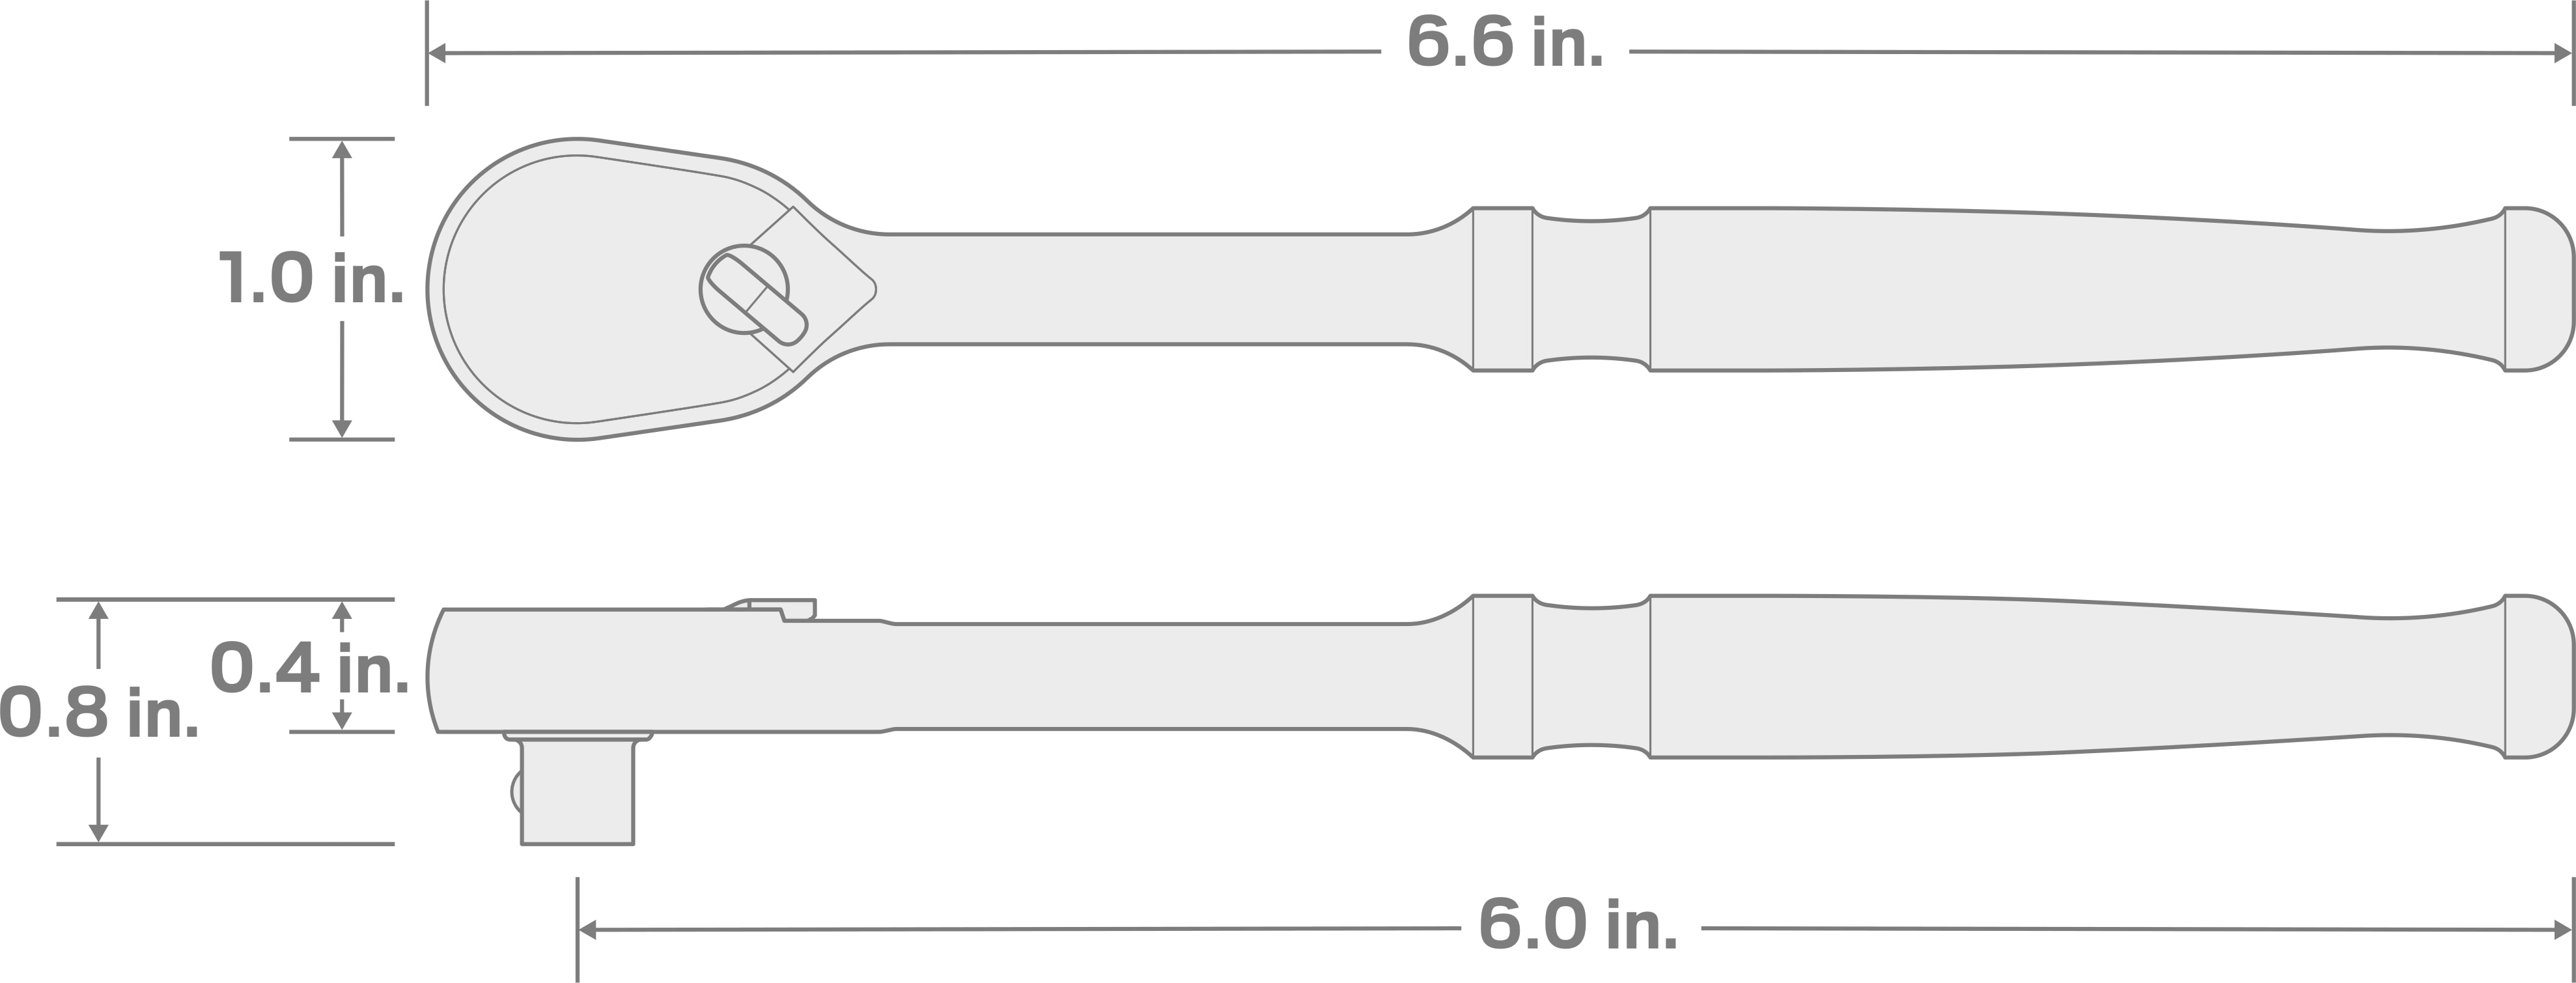 Specs for 1/4 Inch Drive x 6 Inch Ratchet